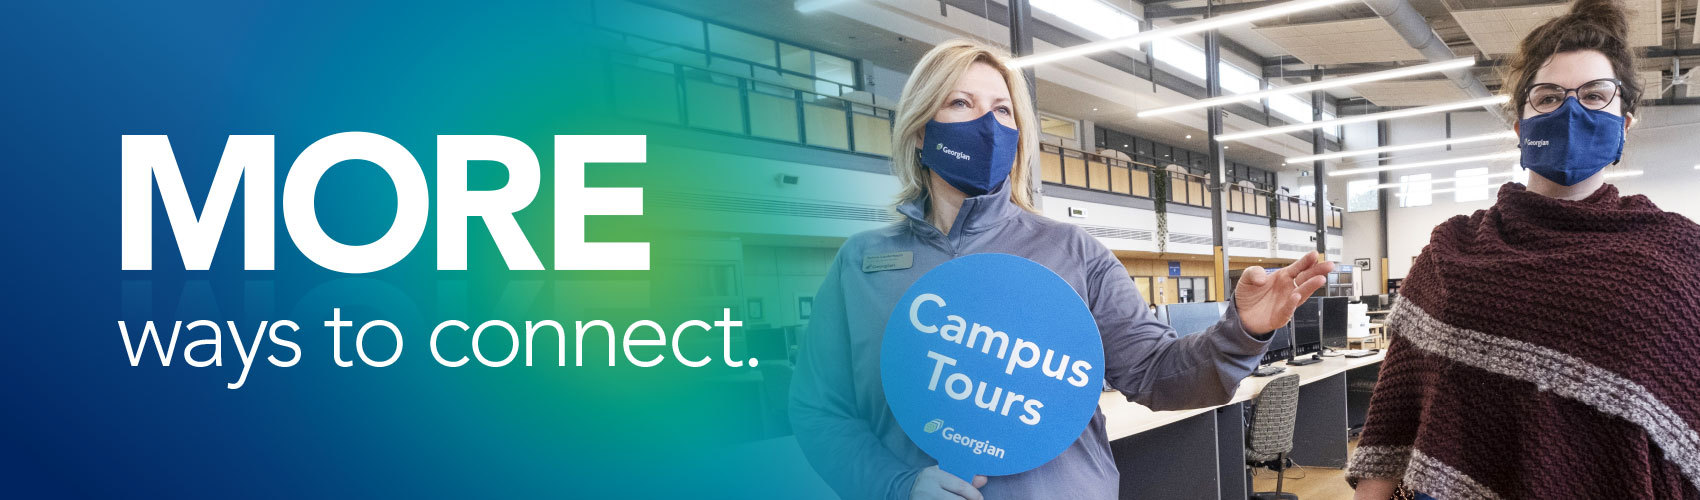 MORE ways to connect with campus tours. A Georgian student recruitment specialist holds a blue "Campus Tours" sign next to a student in the Barrie Campus library.